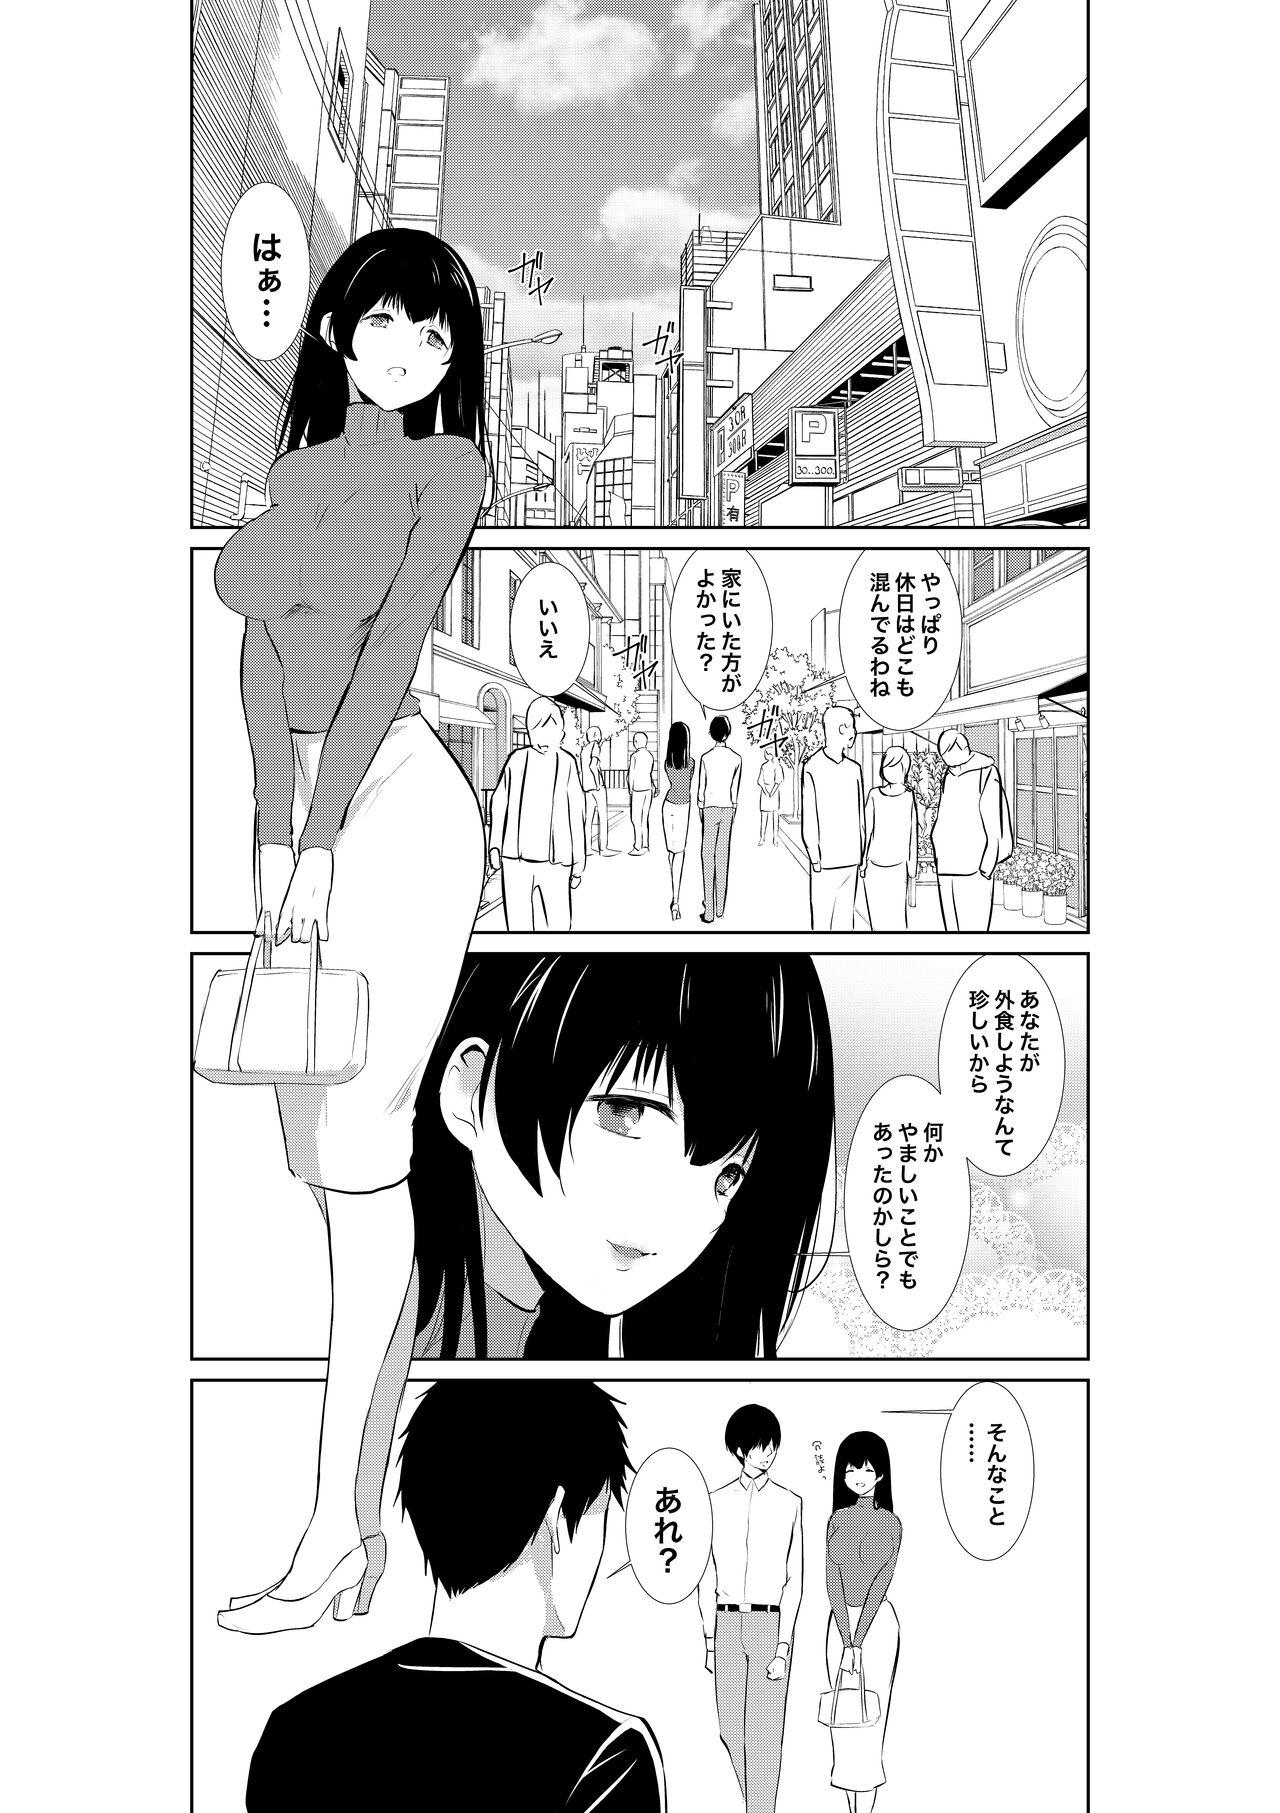 Married 妻が他人に堕ちるまで - Original Taboo - Page 5